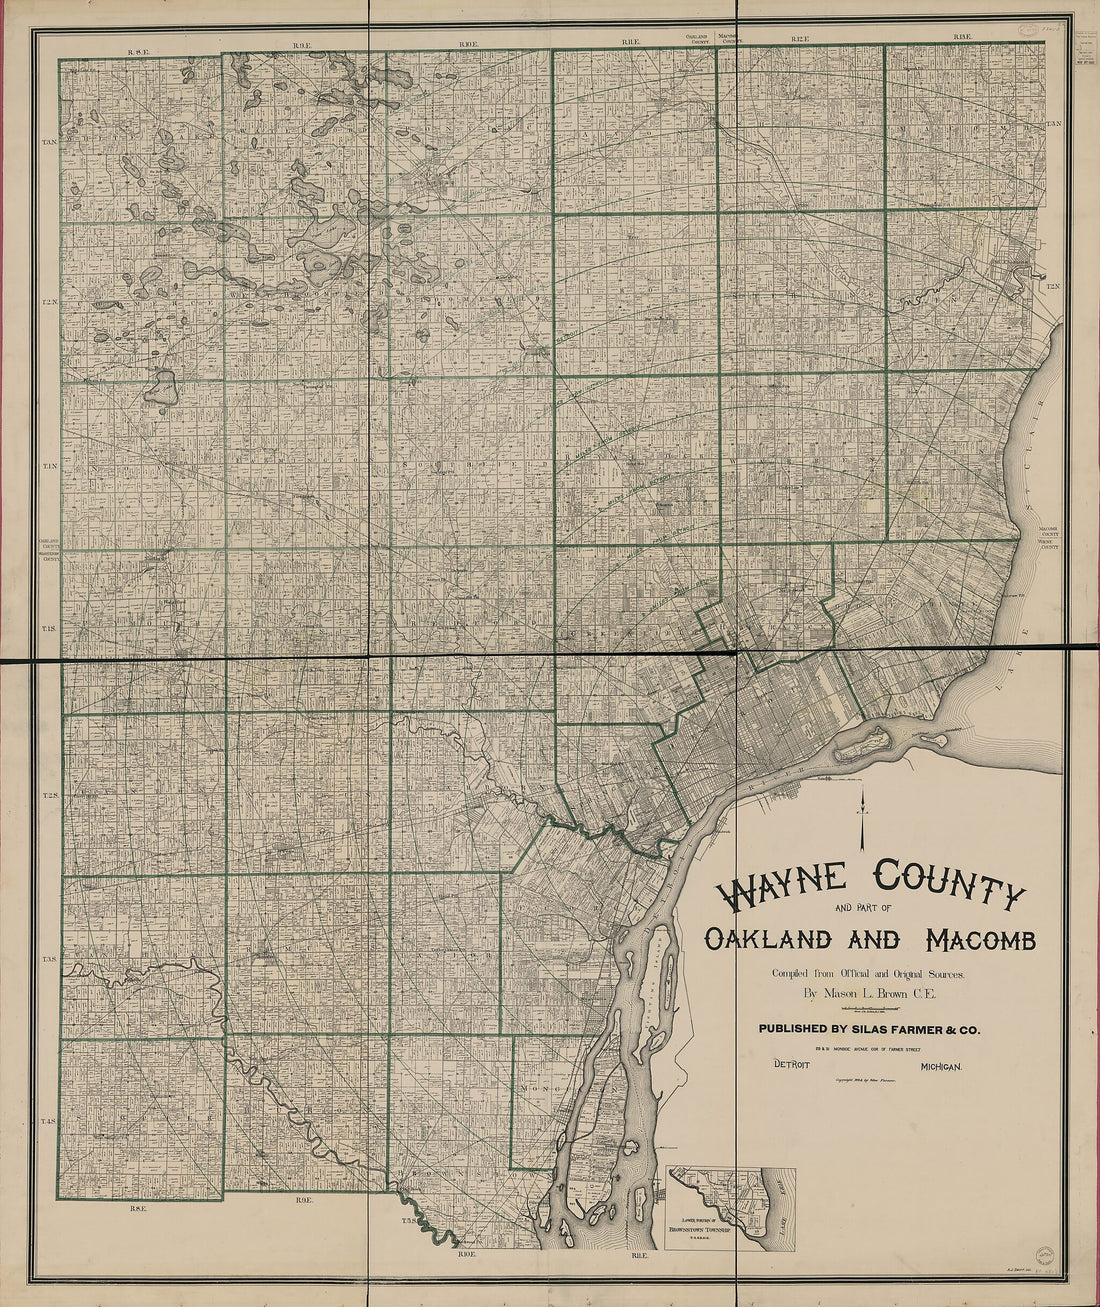 This old map of Wayne County and Part of Oakland and Macomb from 1894 was created by Mason L. Brown,  Silas Farmer &amp; Co in 1894